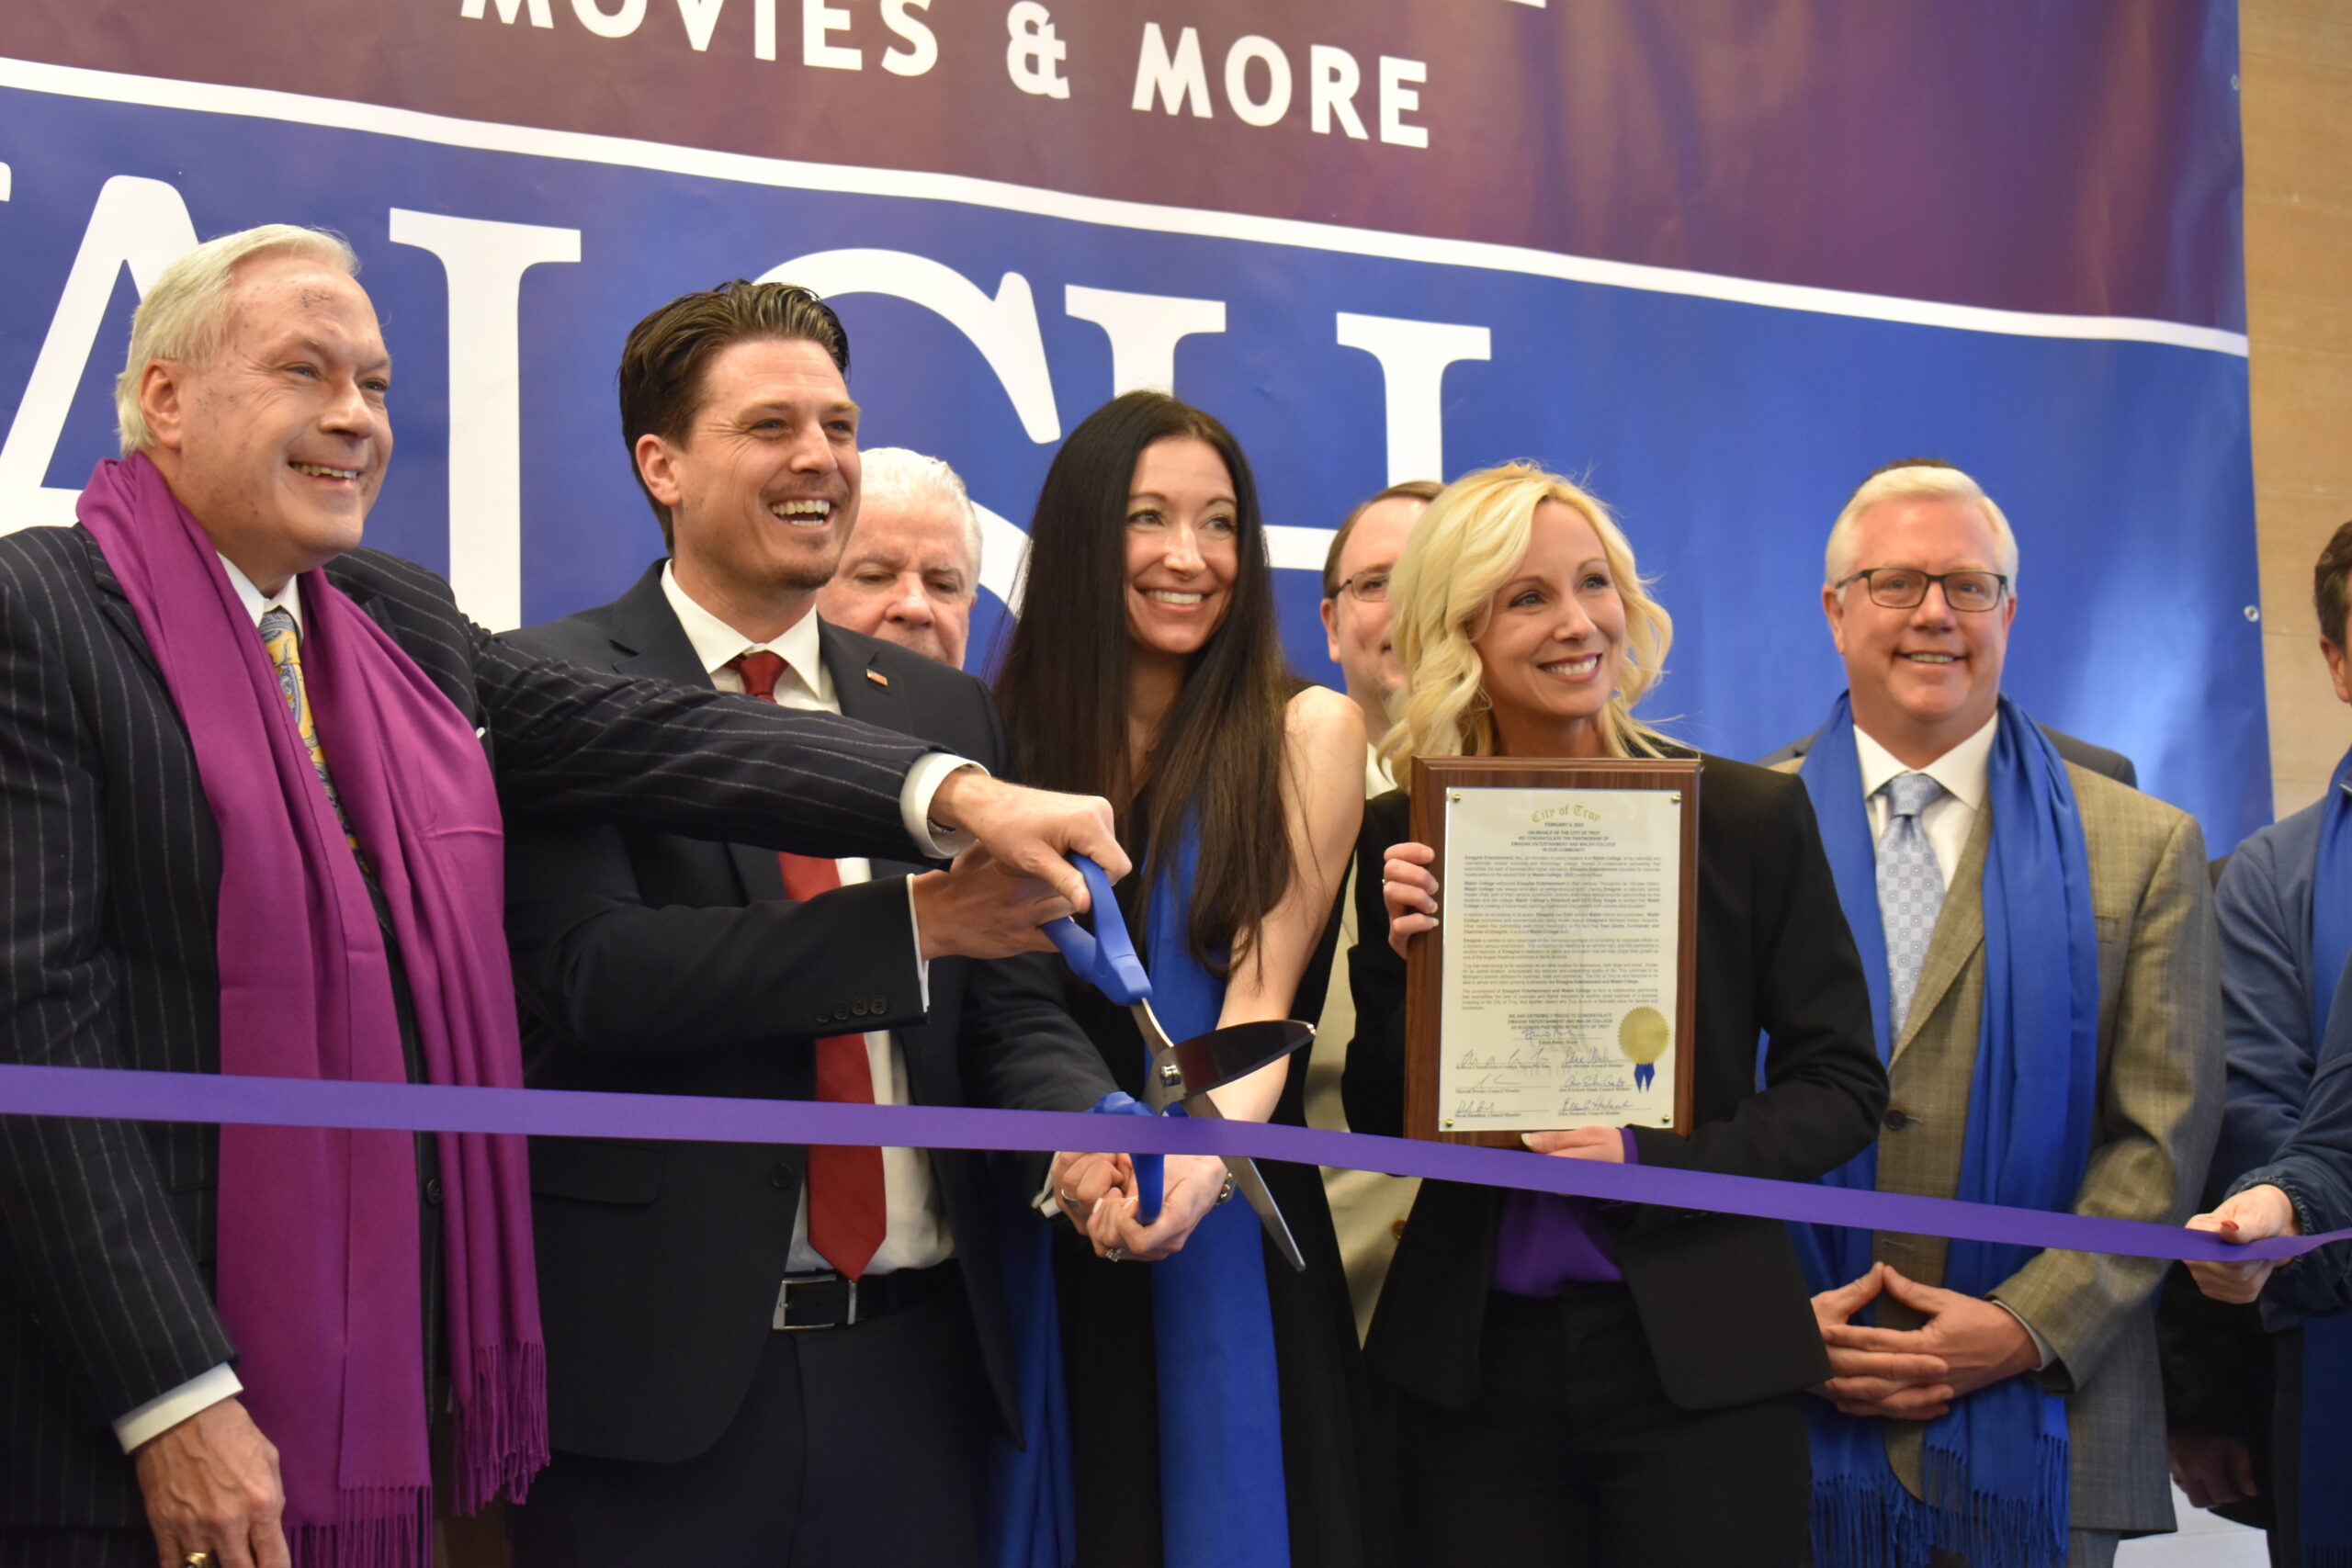 Emagine Entertainment, the Ninth Largest U.S. Movie Theater Chain, Officially Moves Corporate Headquarters to Walsh College Campus